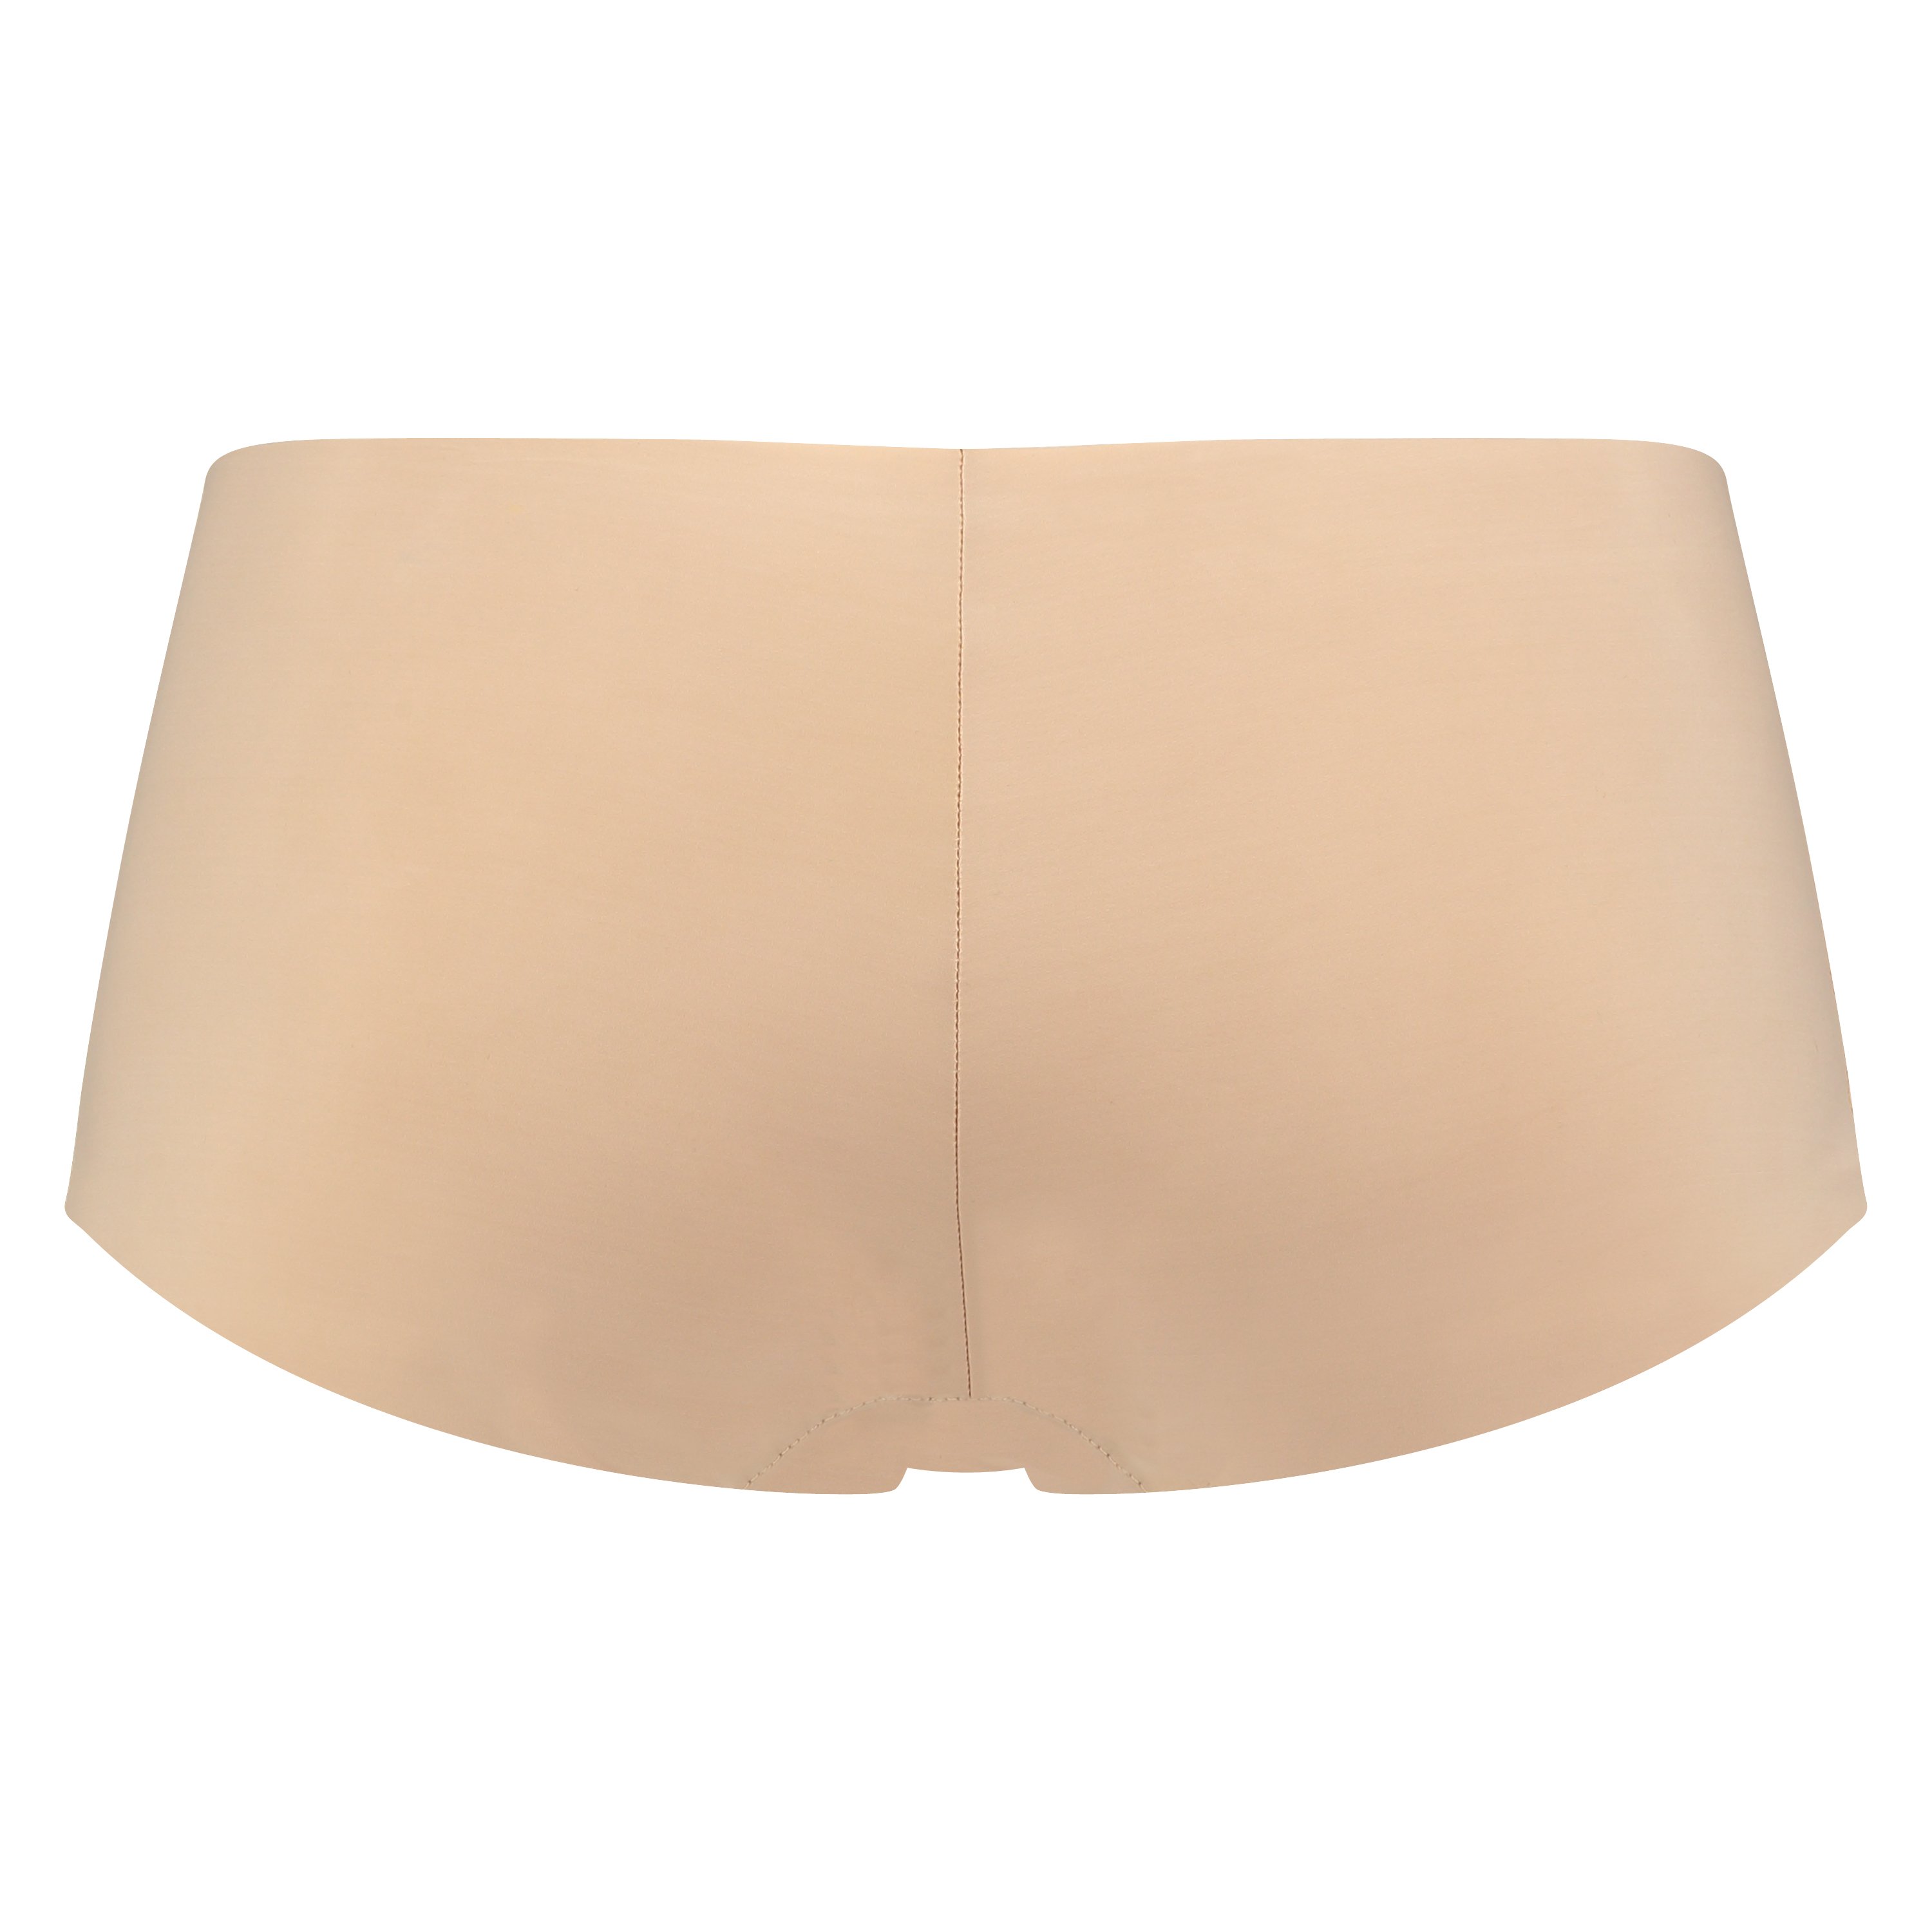 Invisible Boxershorts, Beige, main